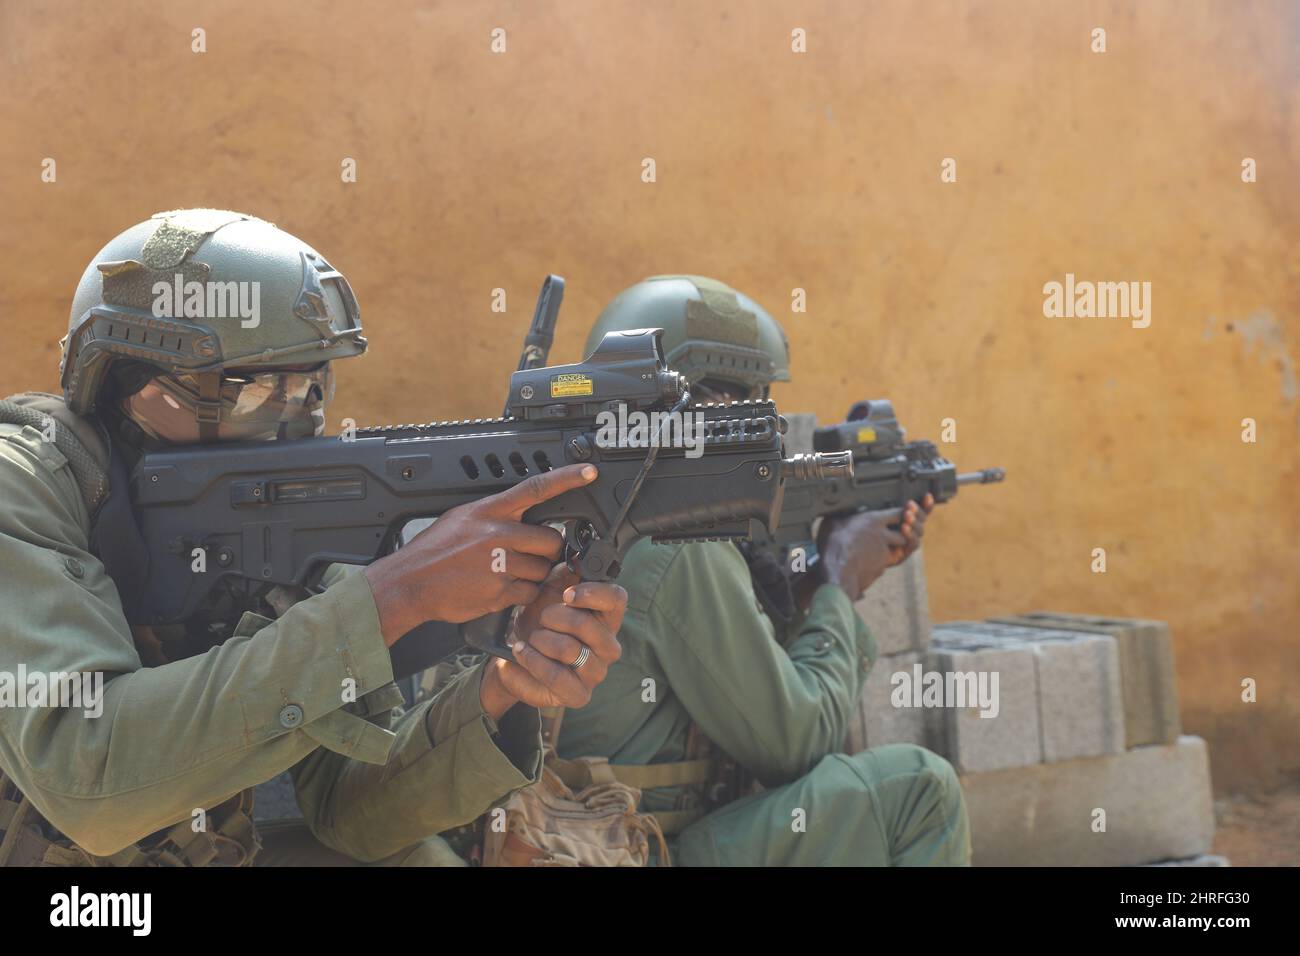 Ivory Coast Special Forces commandos during small unit training alongside French Special Forces during exercise Flintlock 2022 February 19, 2022 near Abidjan, Ivory Coast. Stock Photo